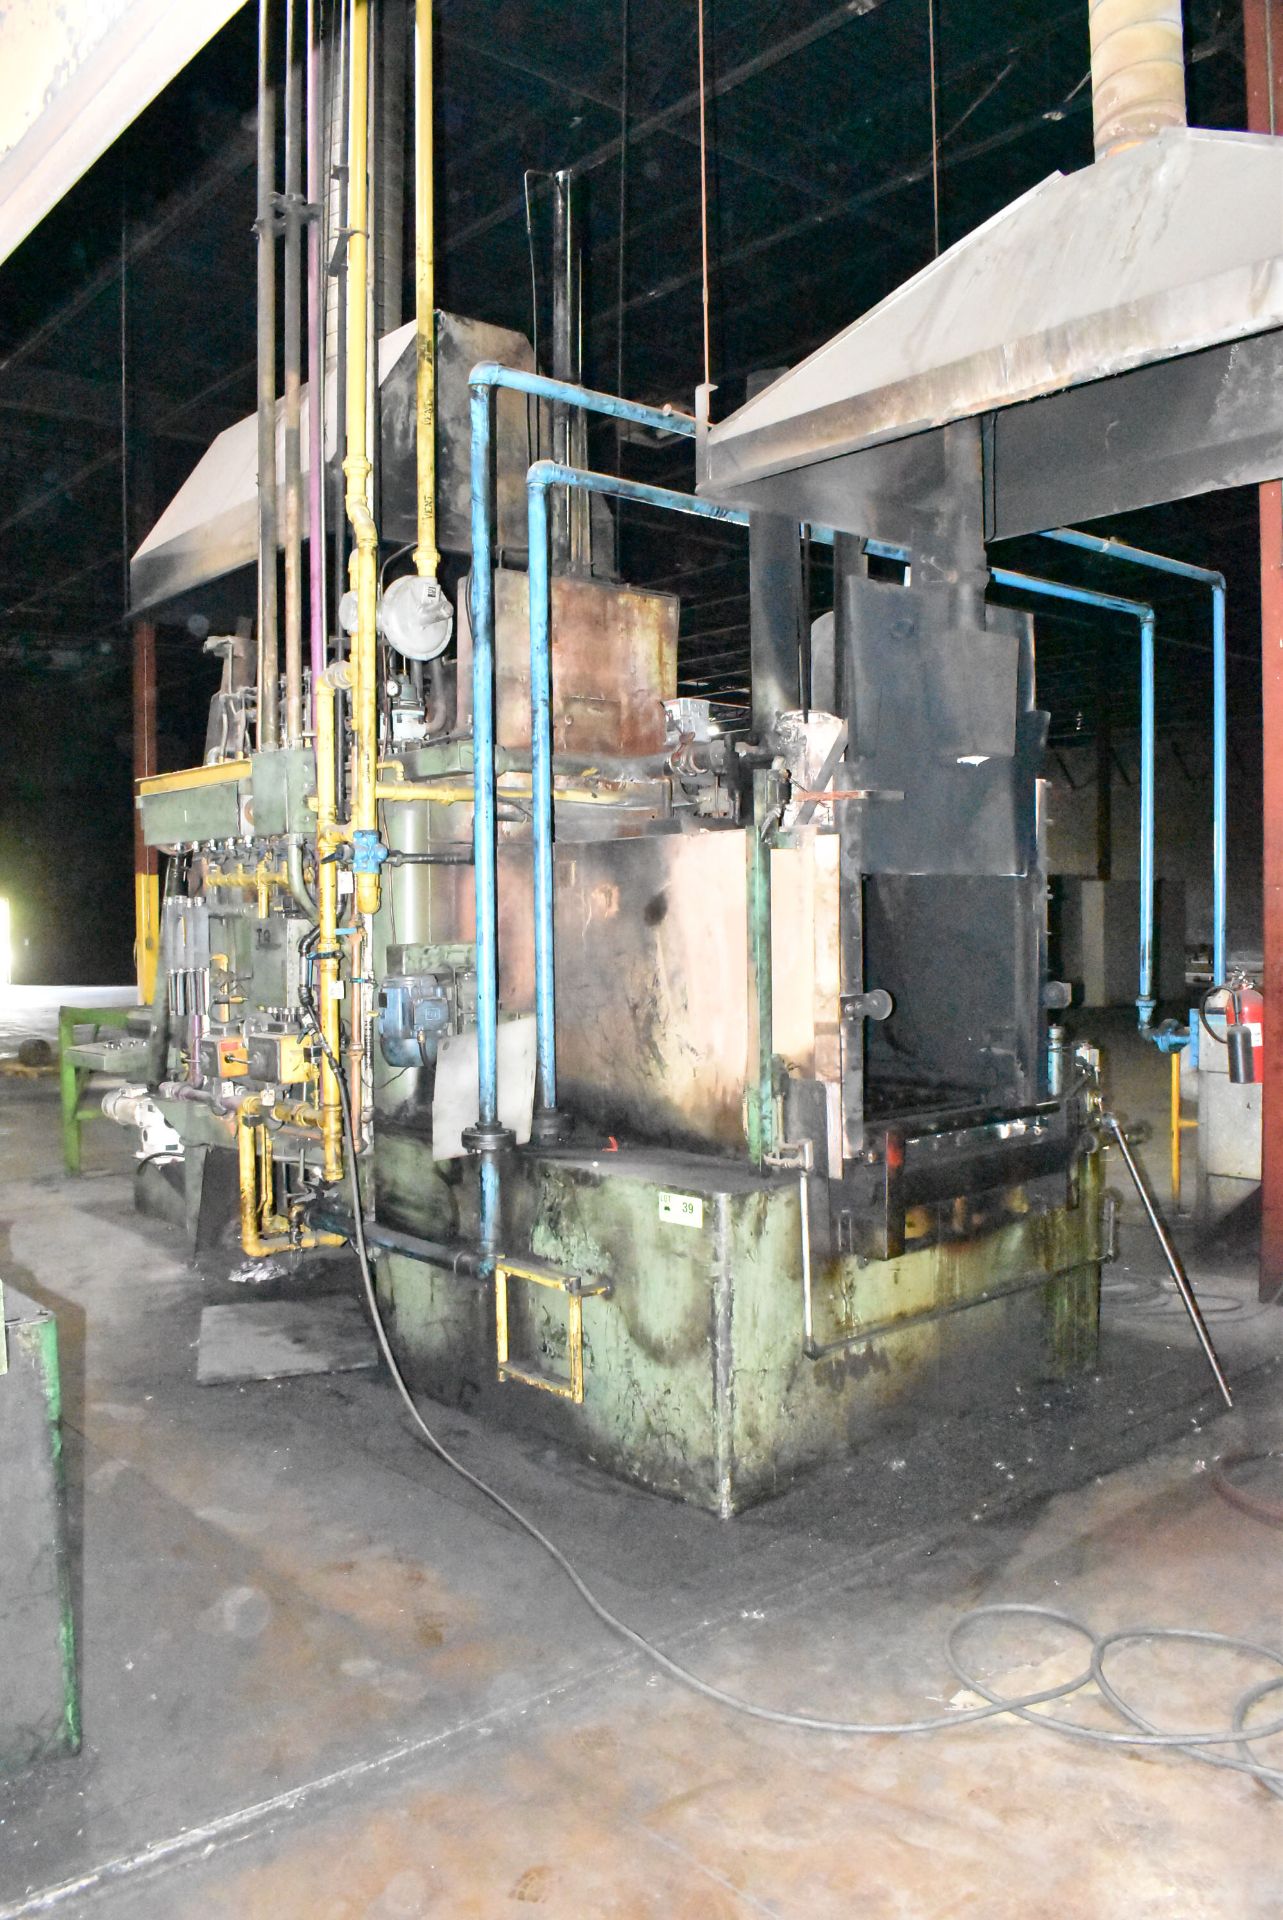 IPSEN T9-1350-AEMS NATURAL GAS FIRED CONTROLLED ATMOSPHERE INTERNAL QUENCH FURNACE WITH RKC REX-C900